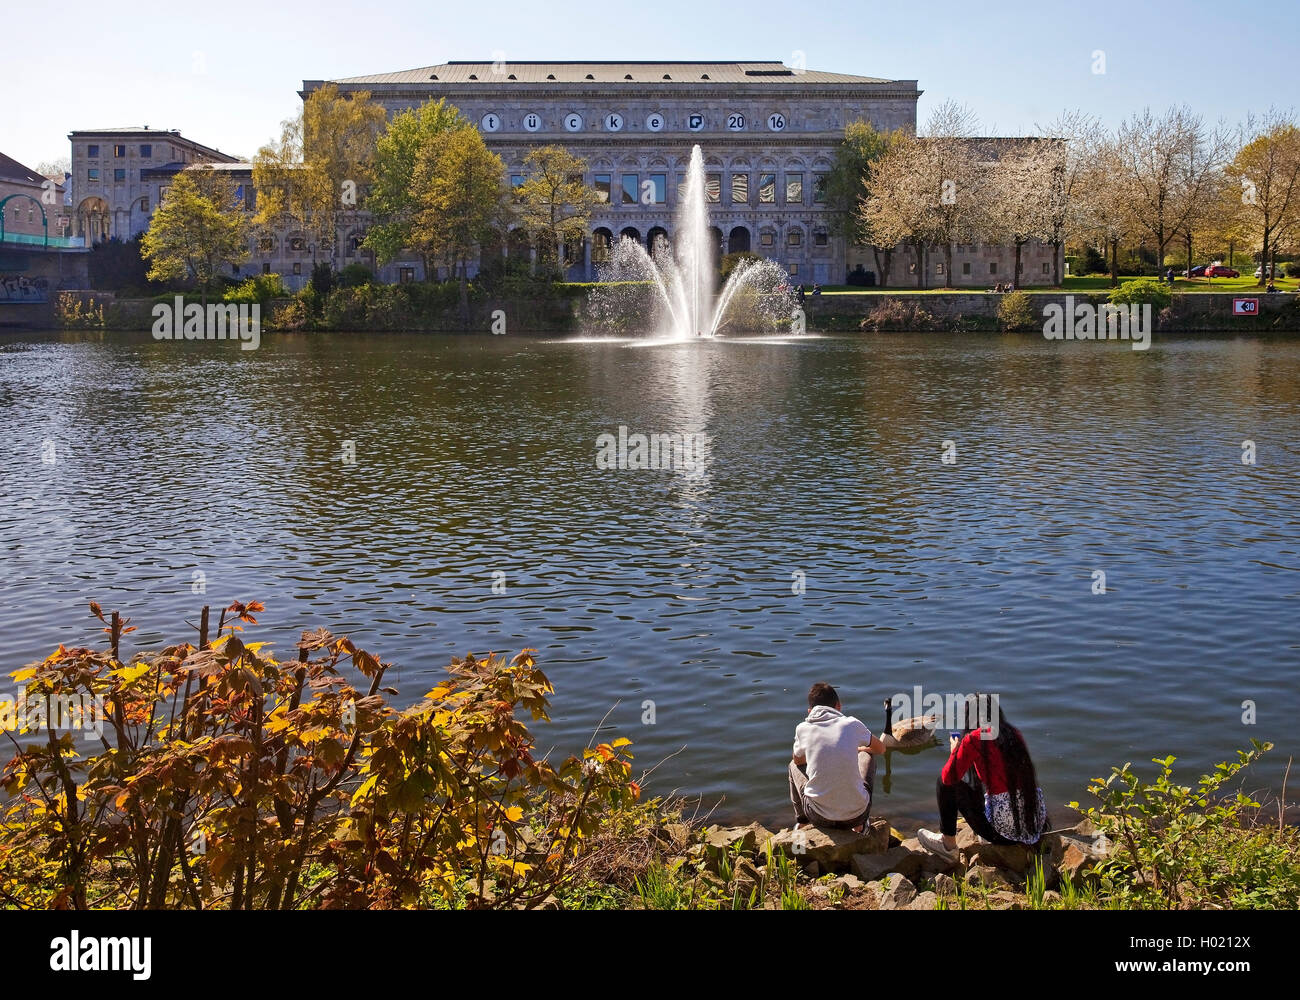 two teenagers at river Ruhr with municipal hall, Germany, North Rhine-Westphalia, Ruhr Area, Muelheim/Ruhr Stock Photo